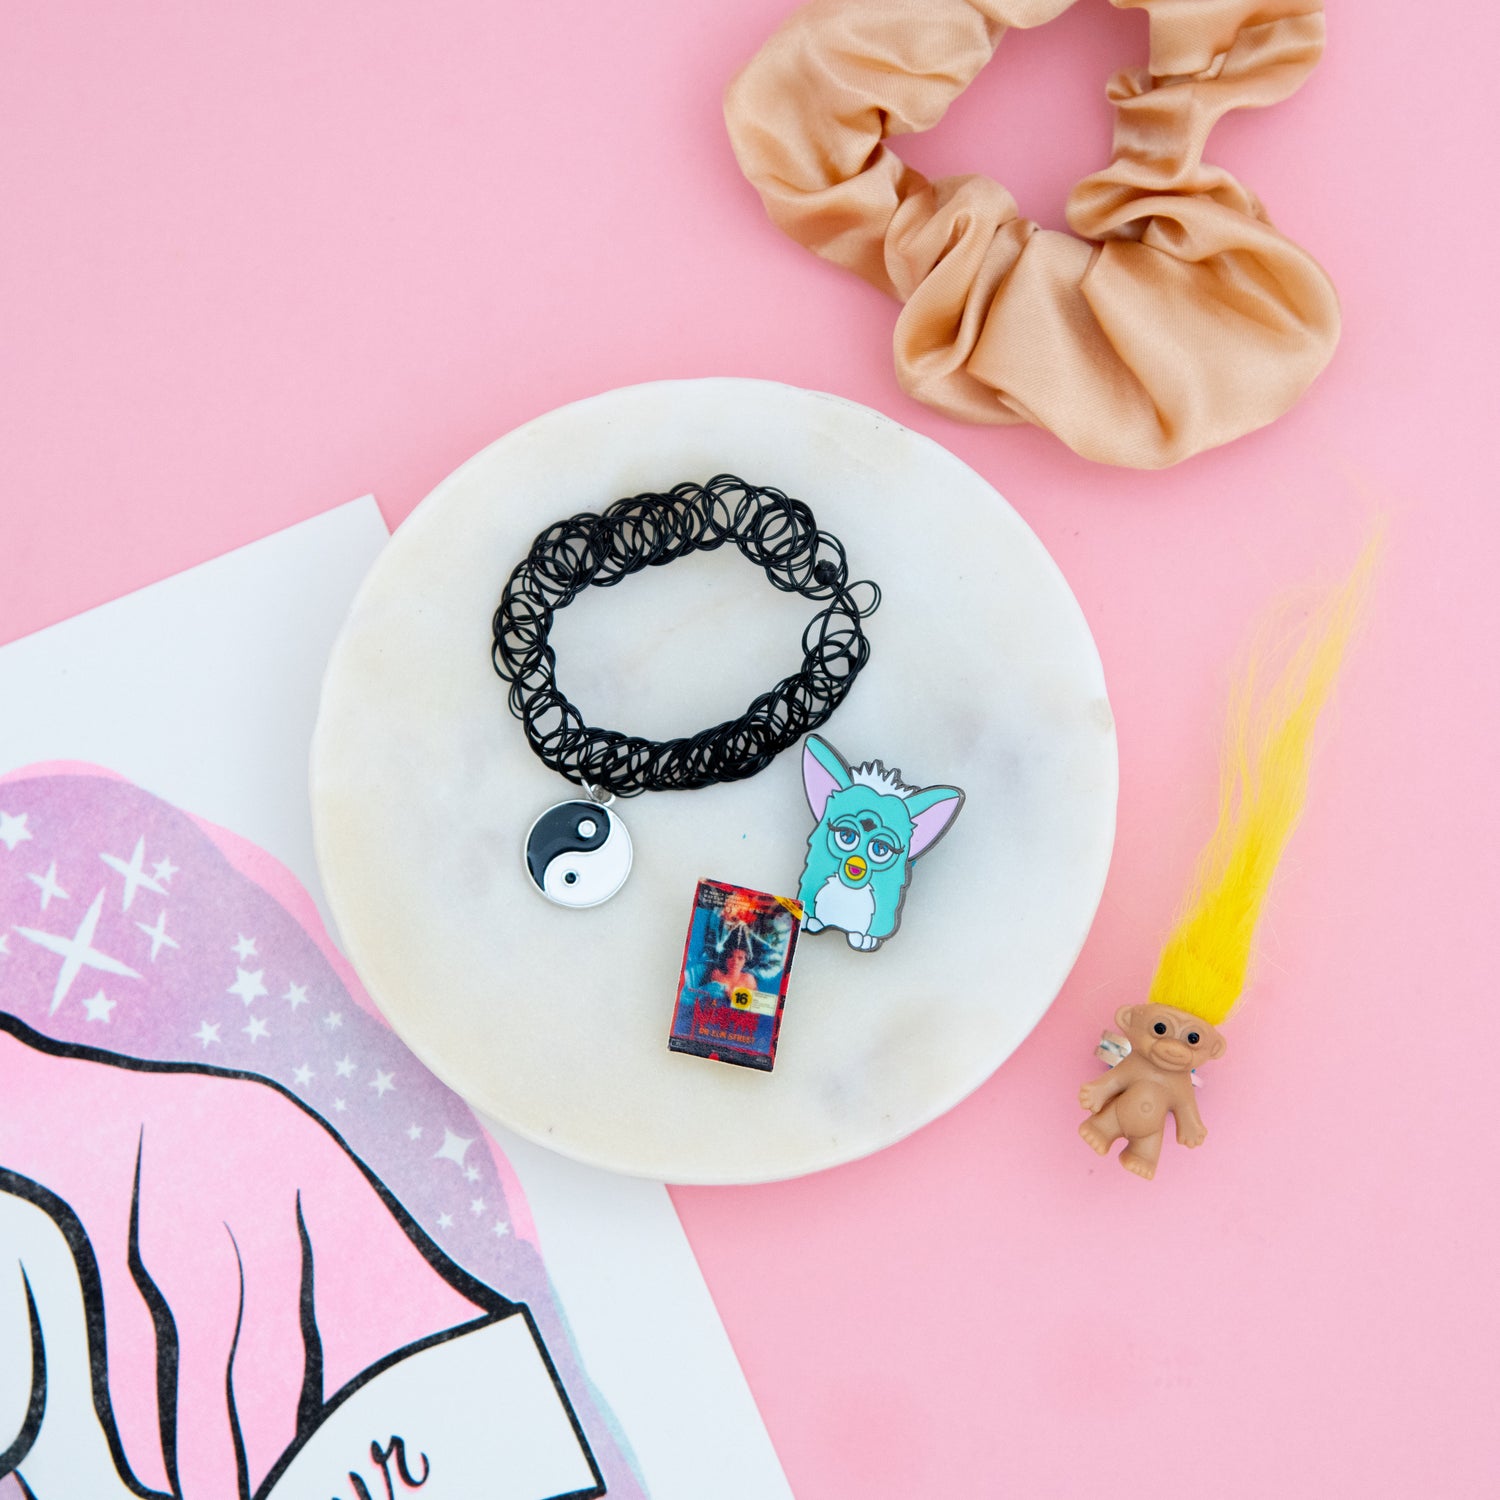 Get your '90s nostalgia fix with The Oddball Club subscription box! This month's box includes a trendy tan scrunchie, a stylish yin yang stretch necklace, a collectible Furby pin, a fun troll ring with yellow hair, all against a playful pink background. Join The Oddball Club today for unique and quirky finds!